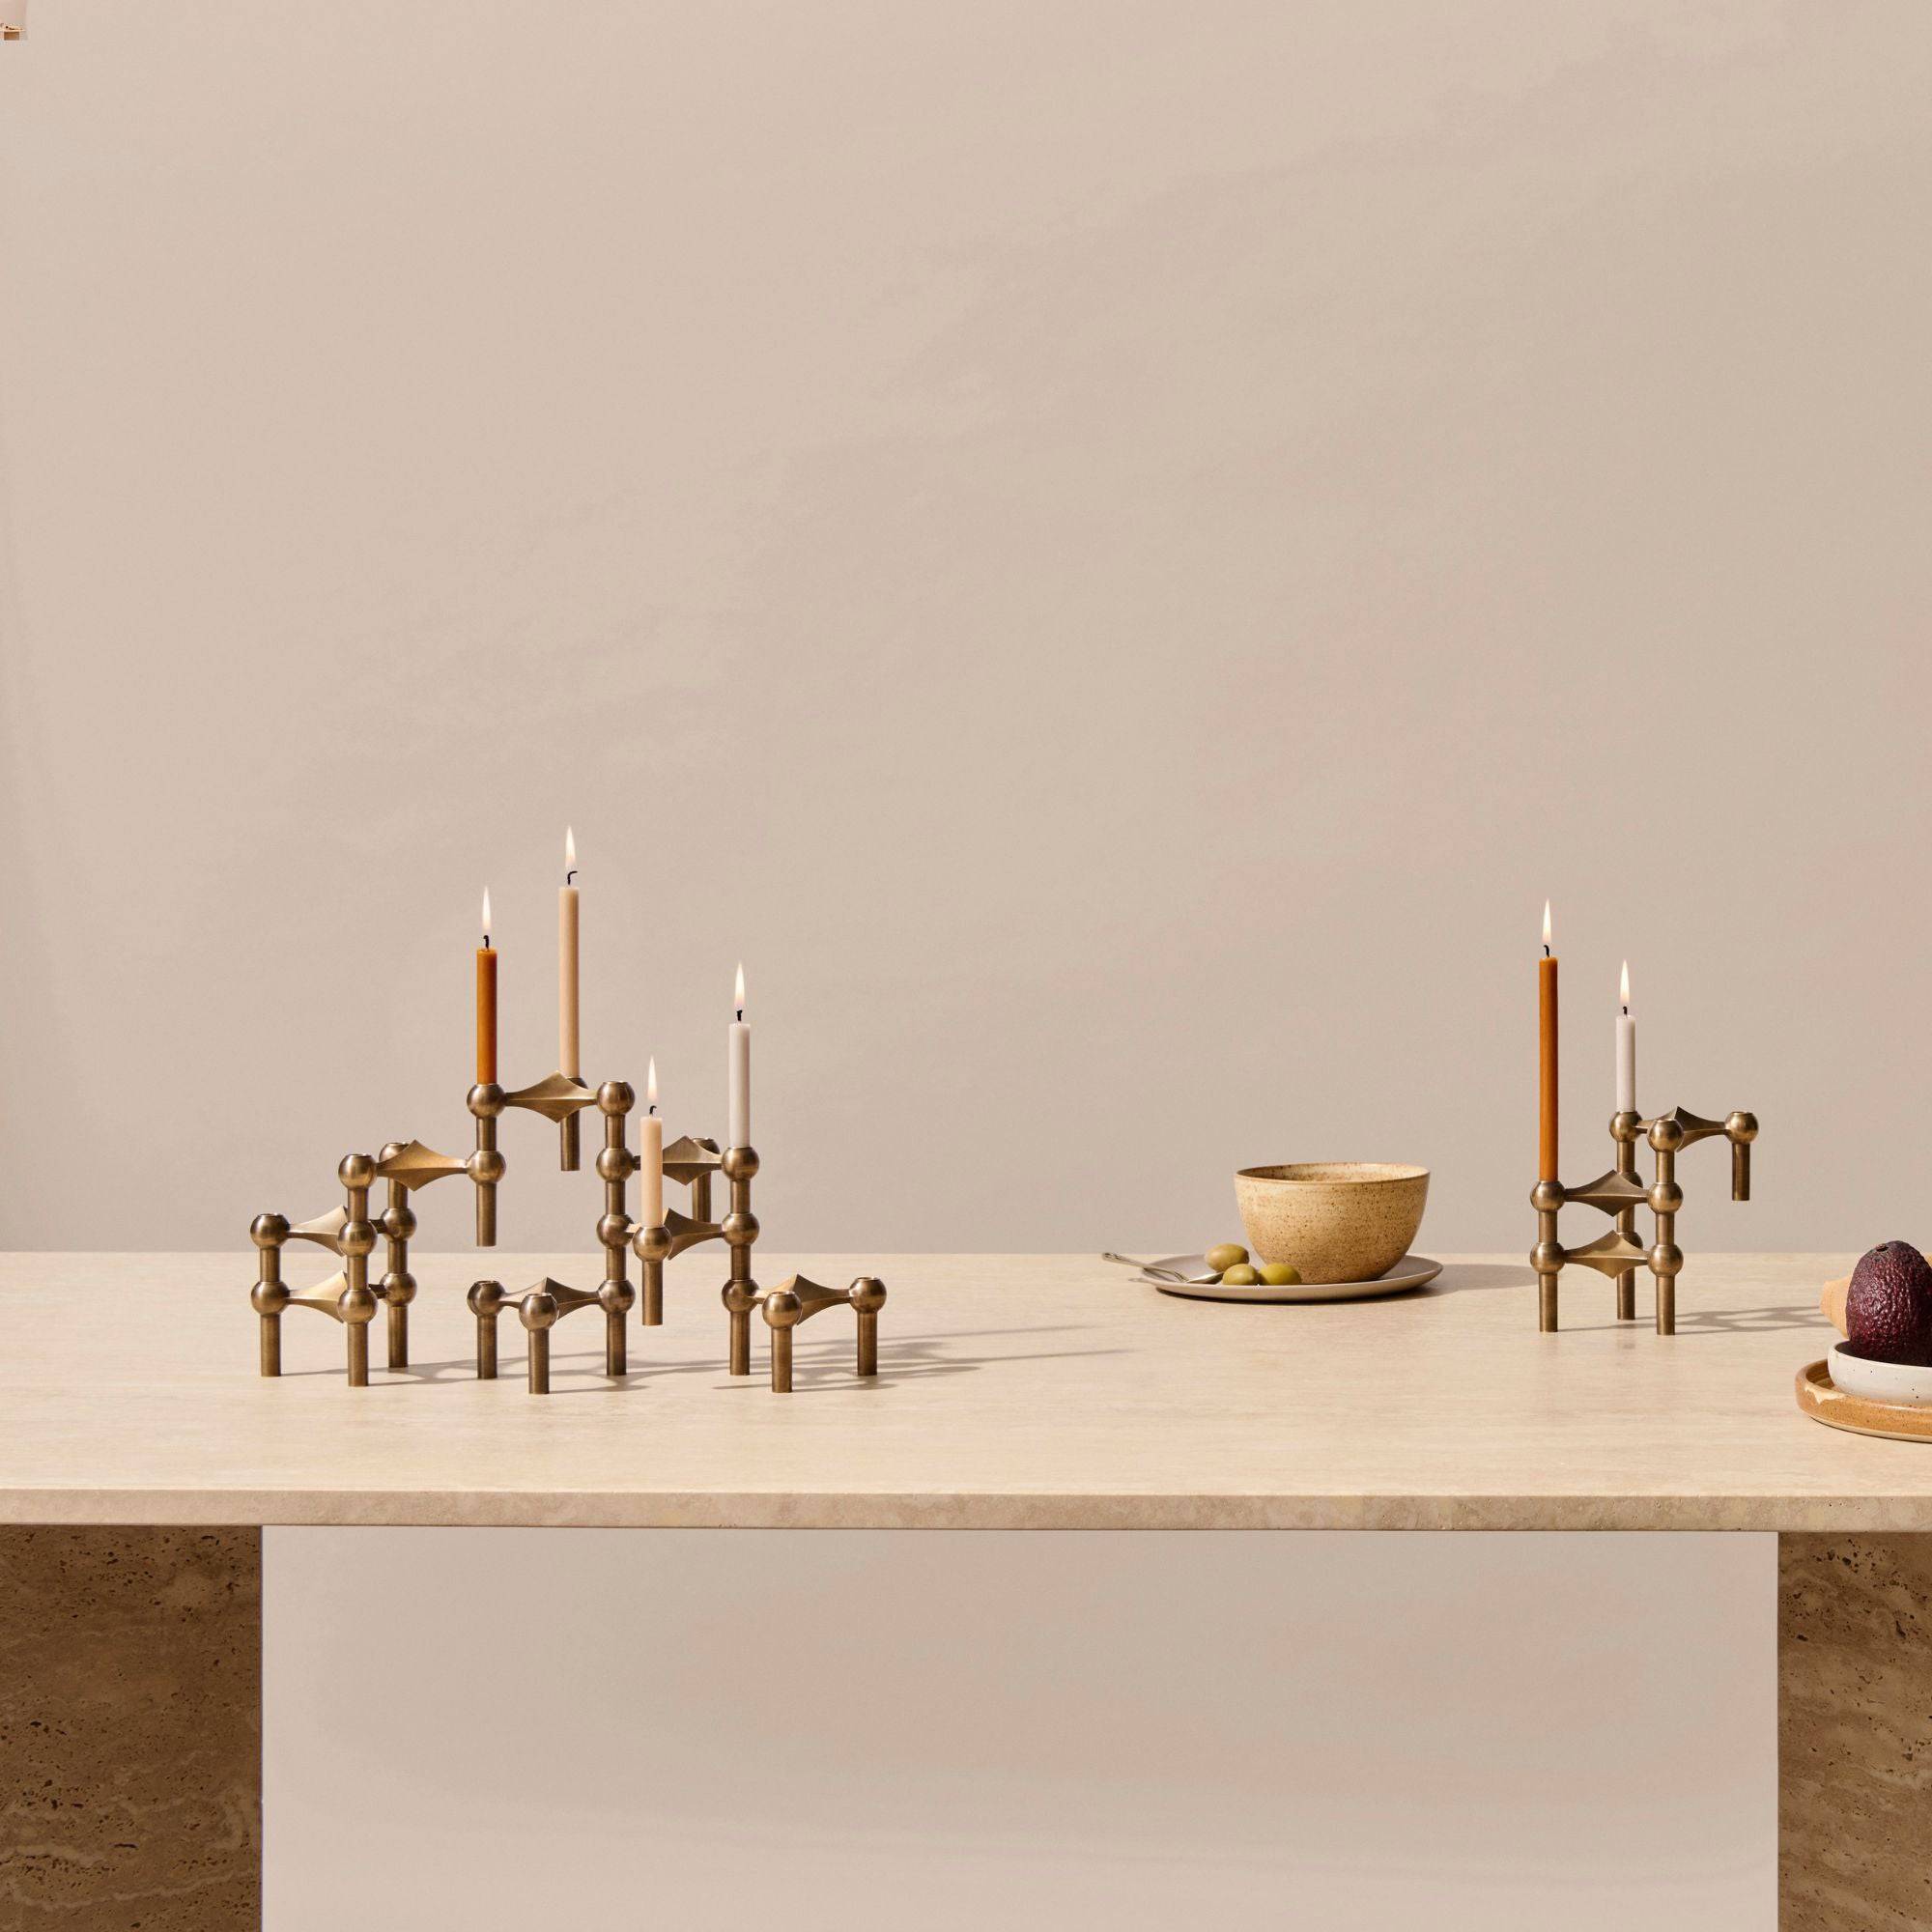 Modular Candle Holder - Bronzed Brass - THAT COOL LIVING